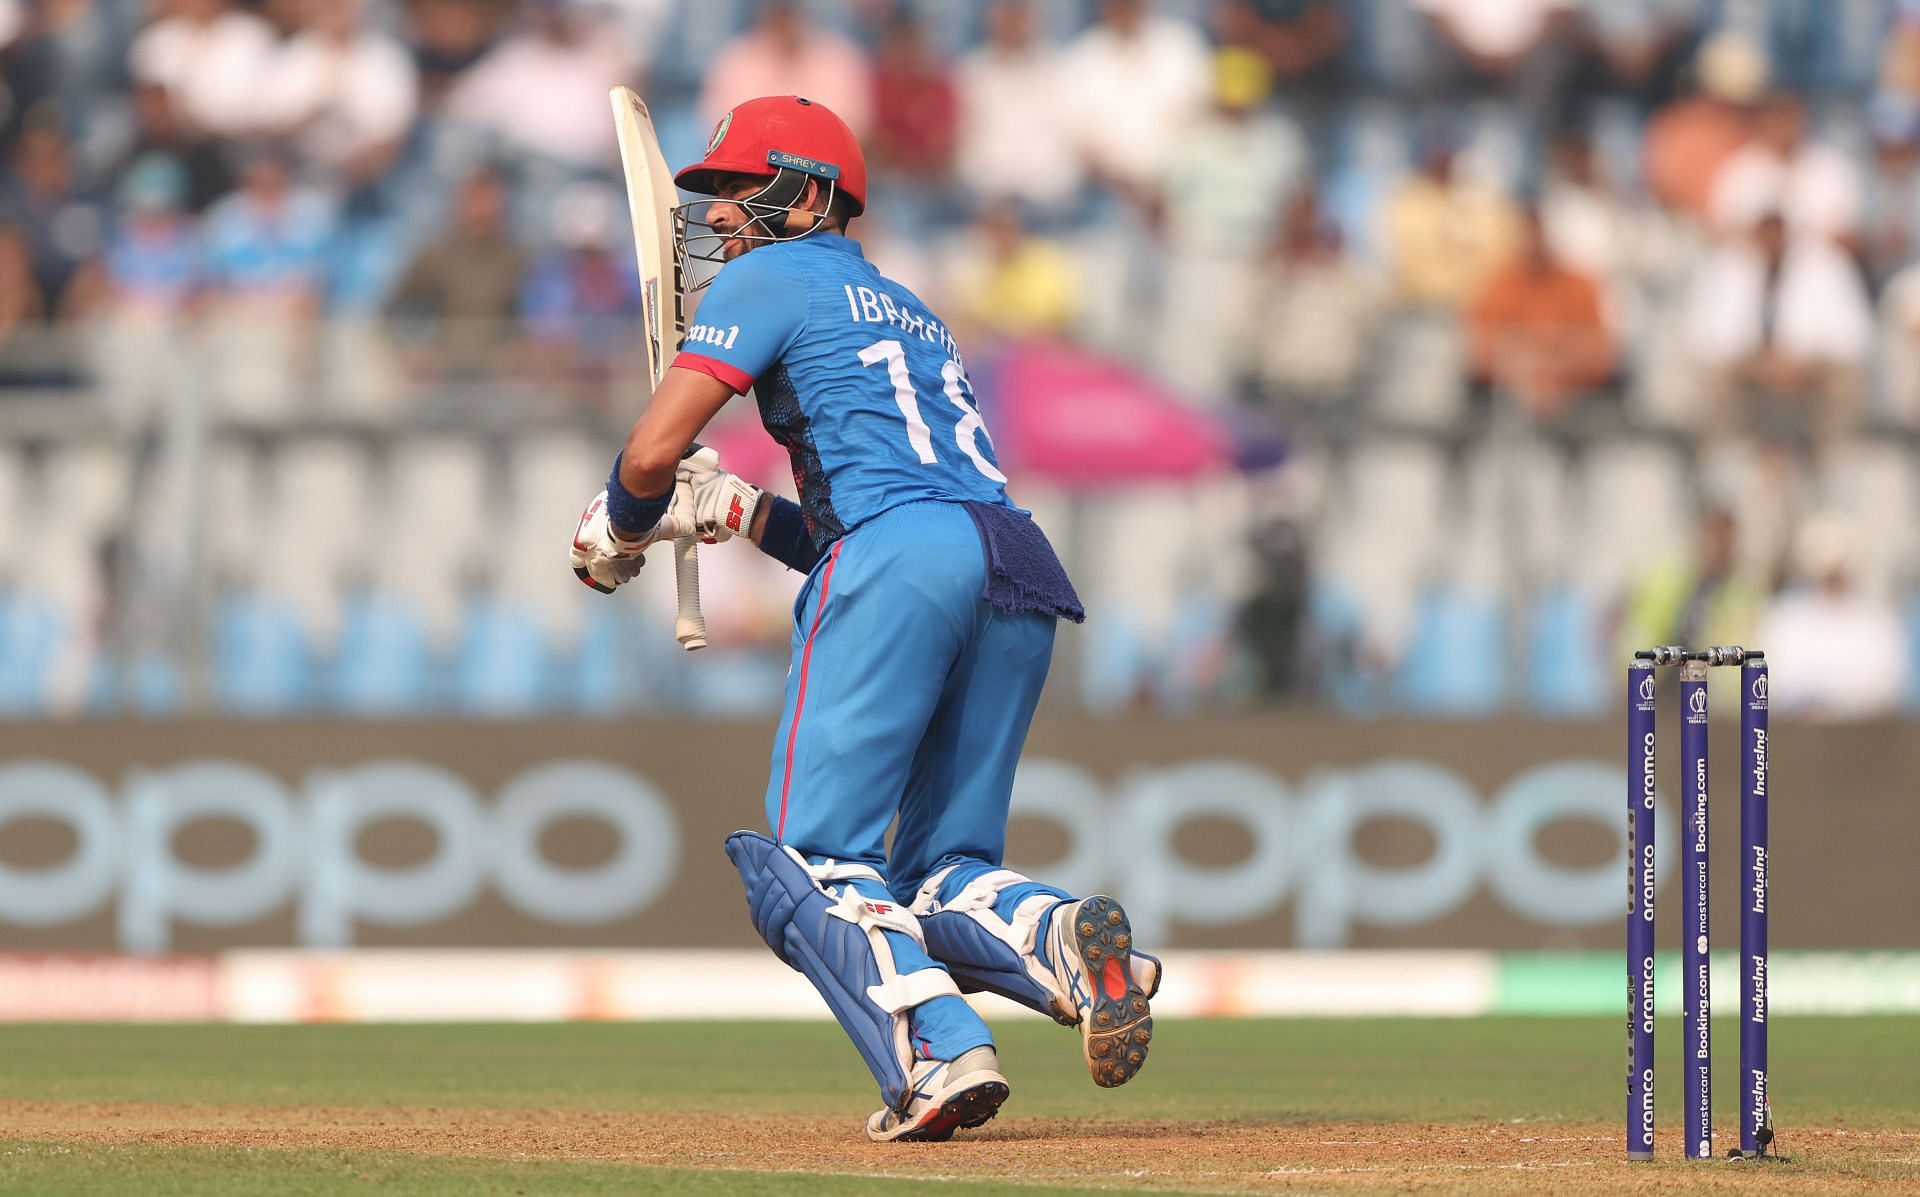 Afghanistan captain Ibrahim Zadran needs to bat at a quicker pace